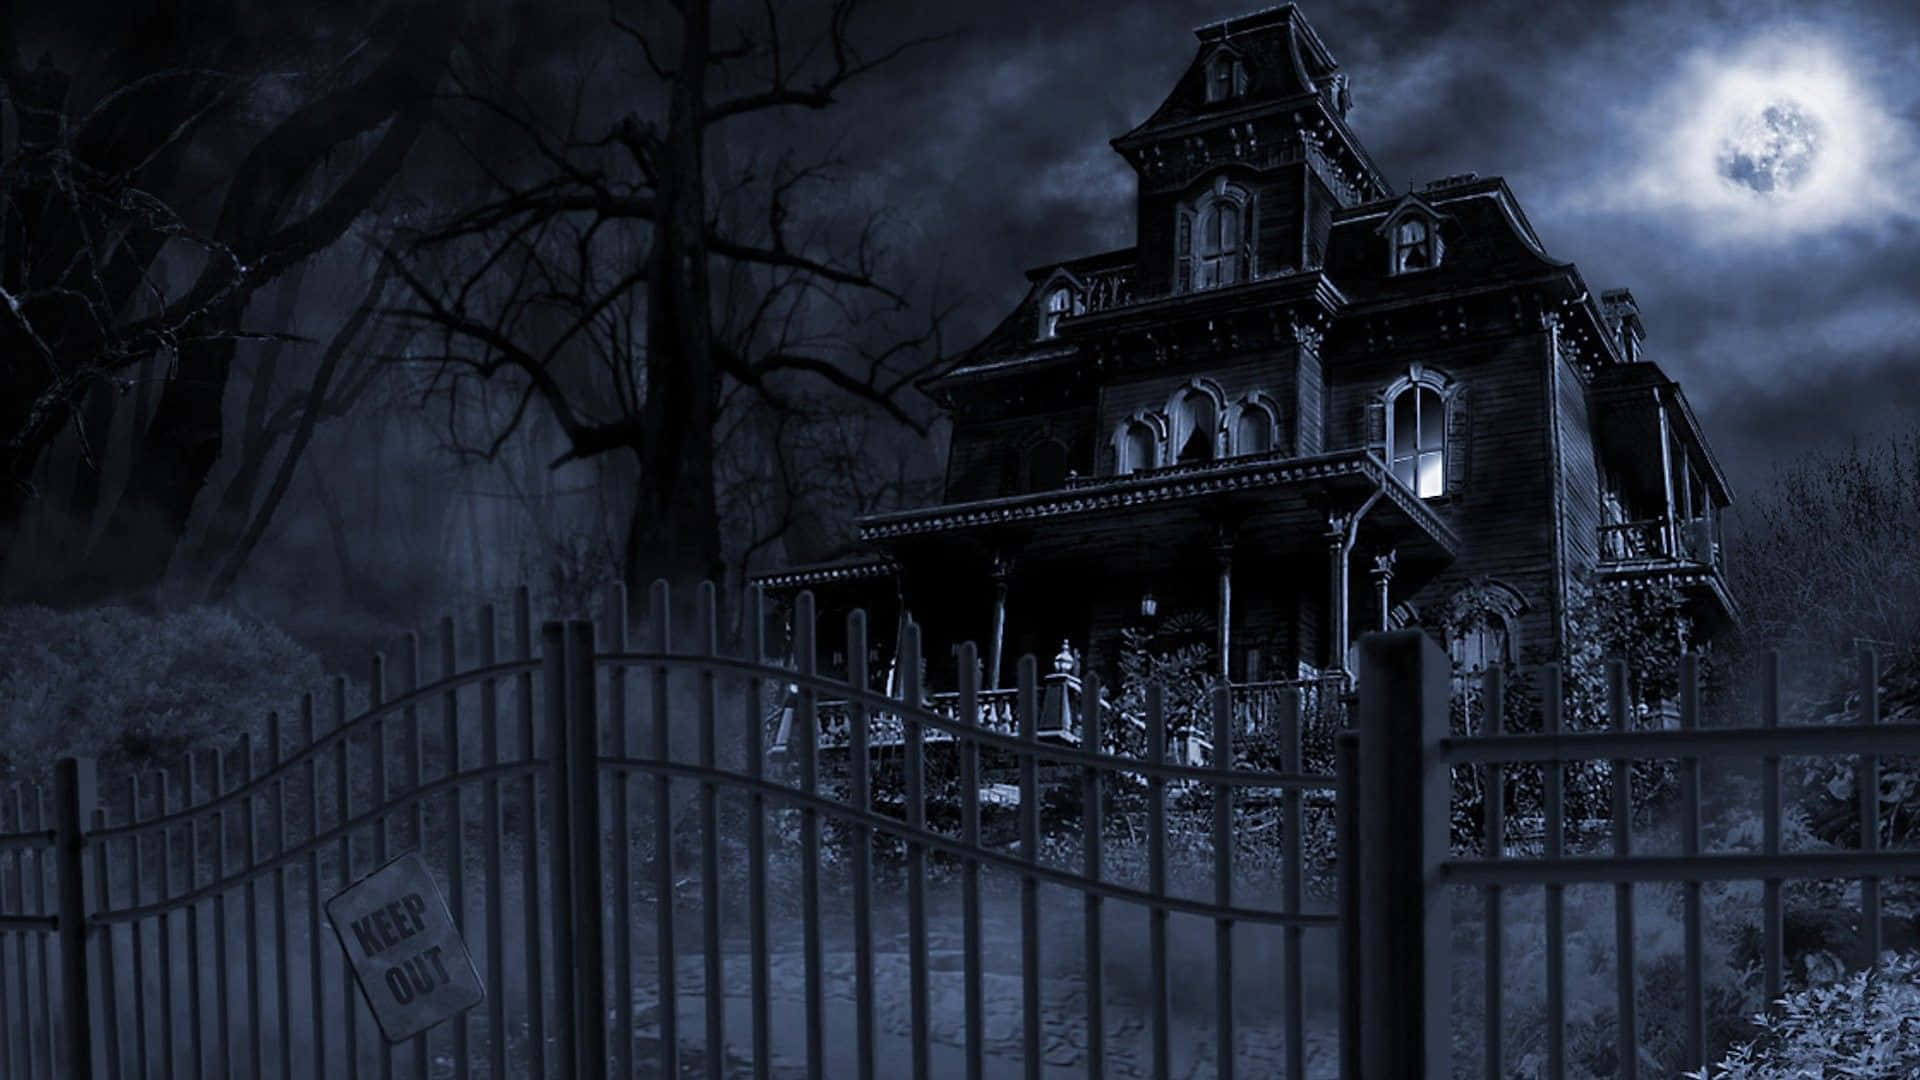 An old haunted house with an eerie atmosphere